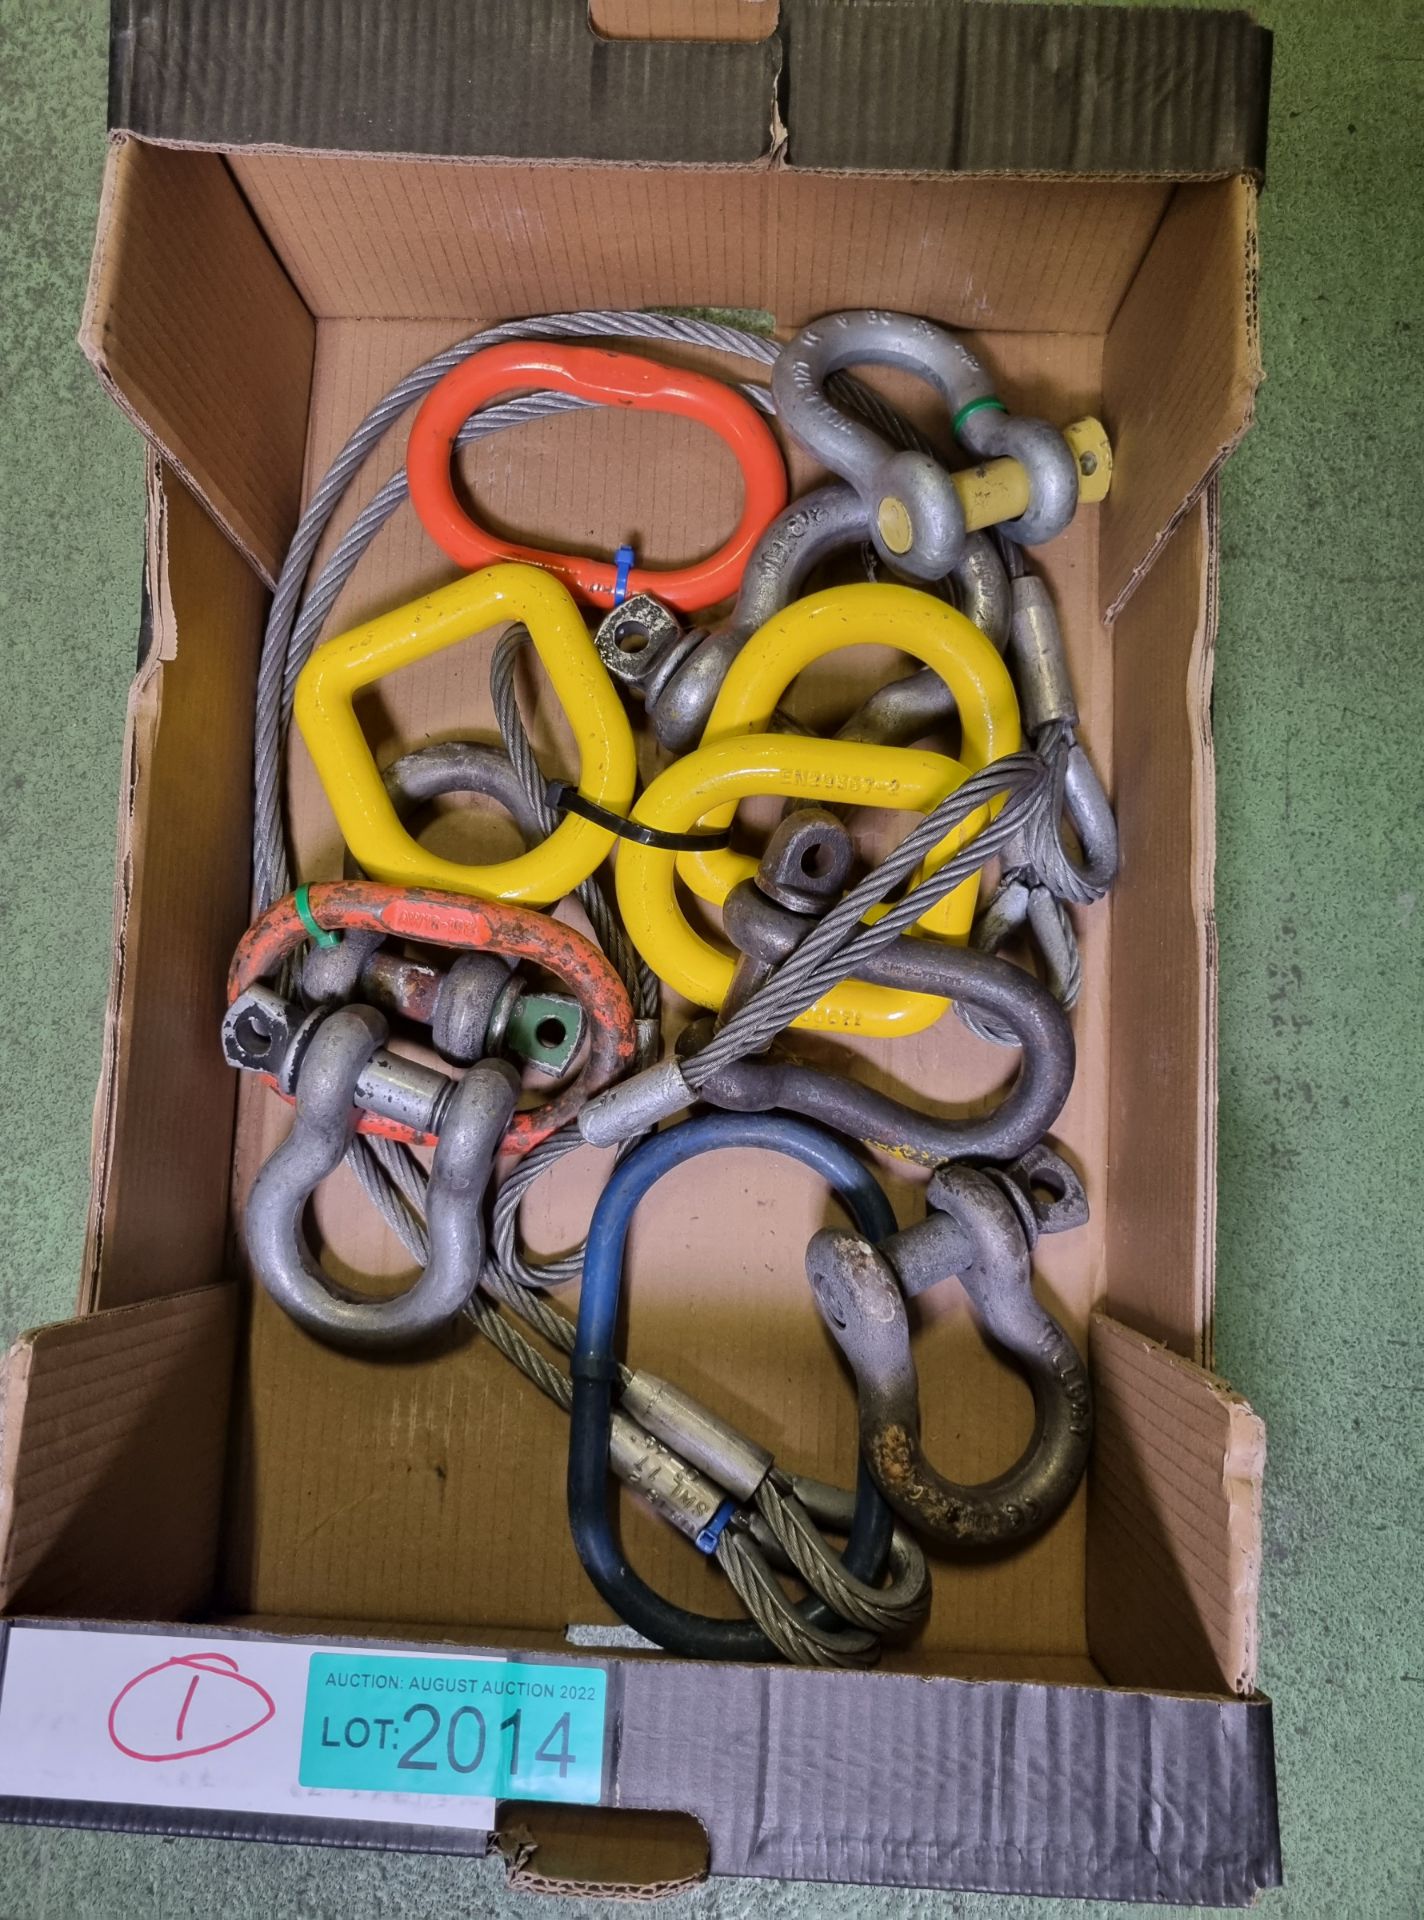 Lifting equipment - D-shackles, Strops - Image 3 of 3